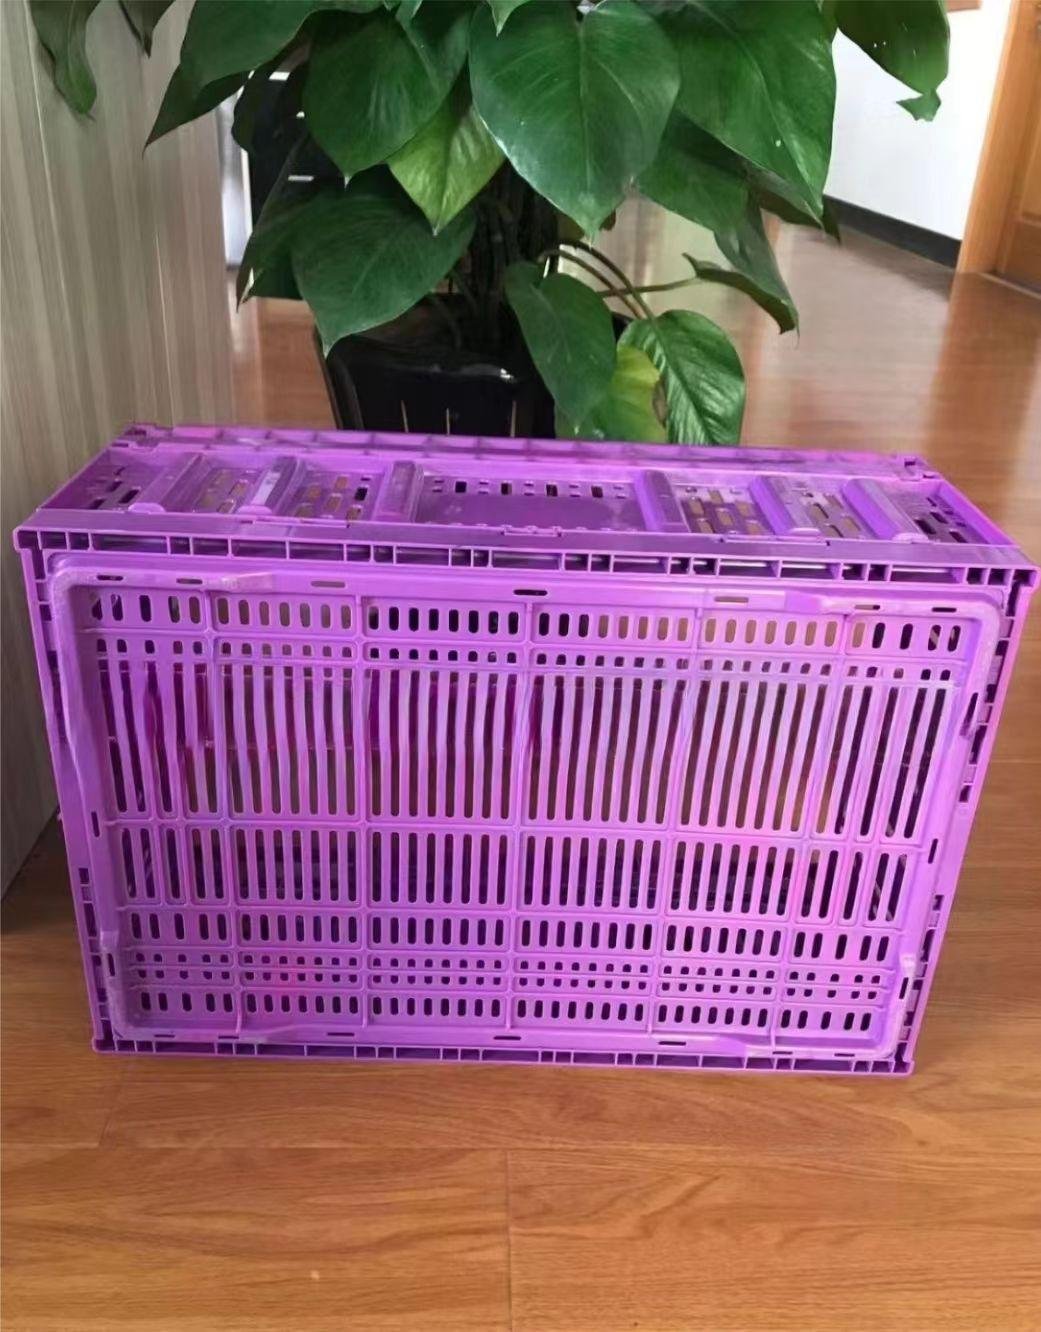 Taizhou professional factory customized high-quality plastic crate mold 2